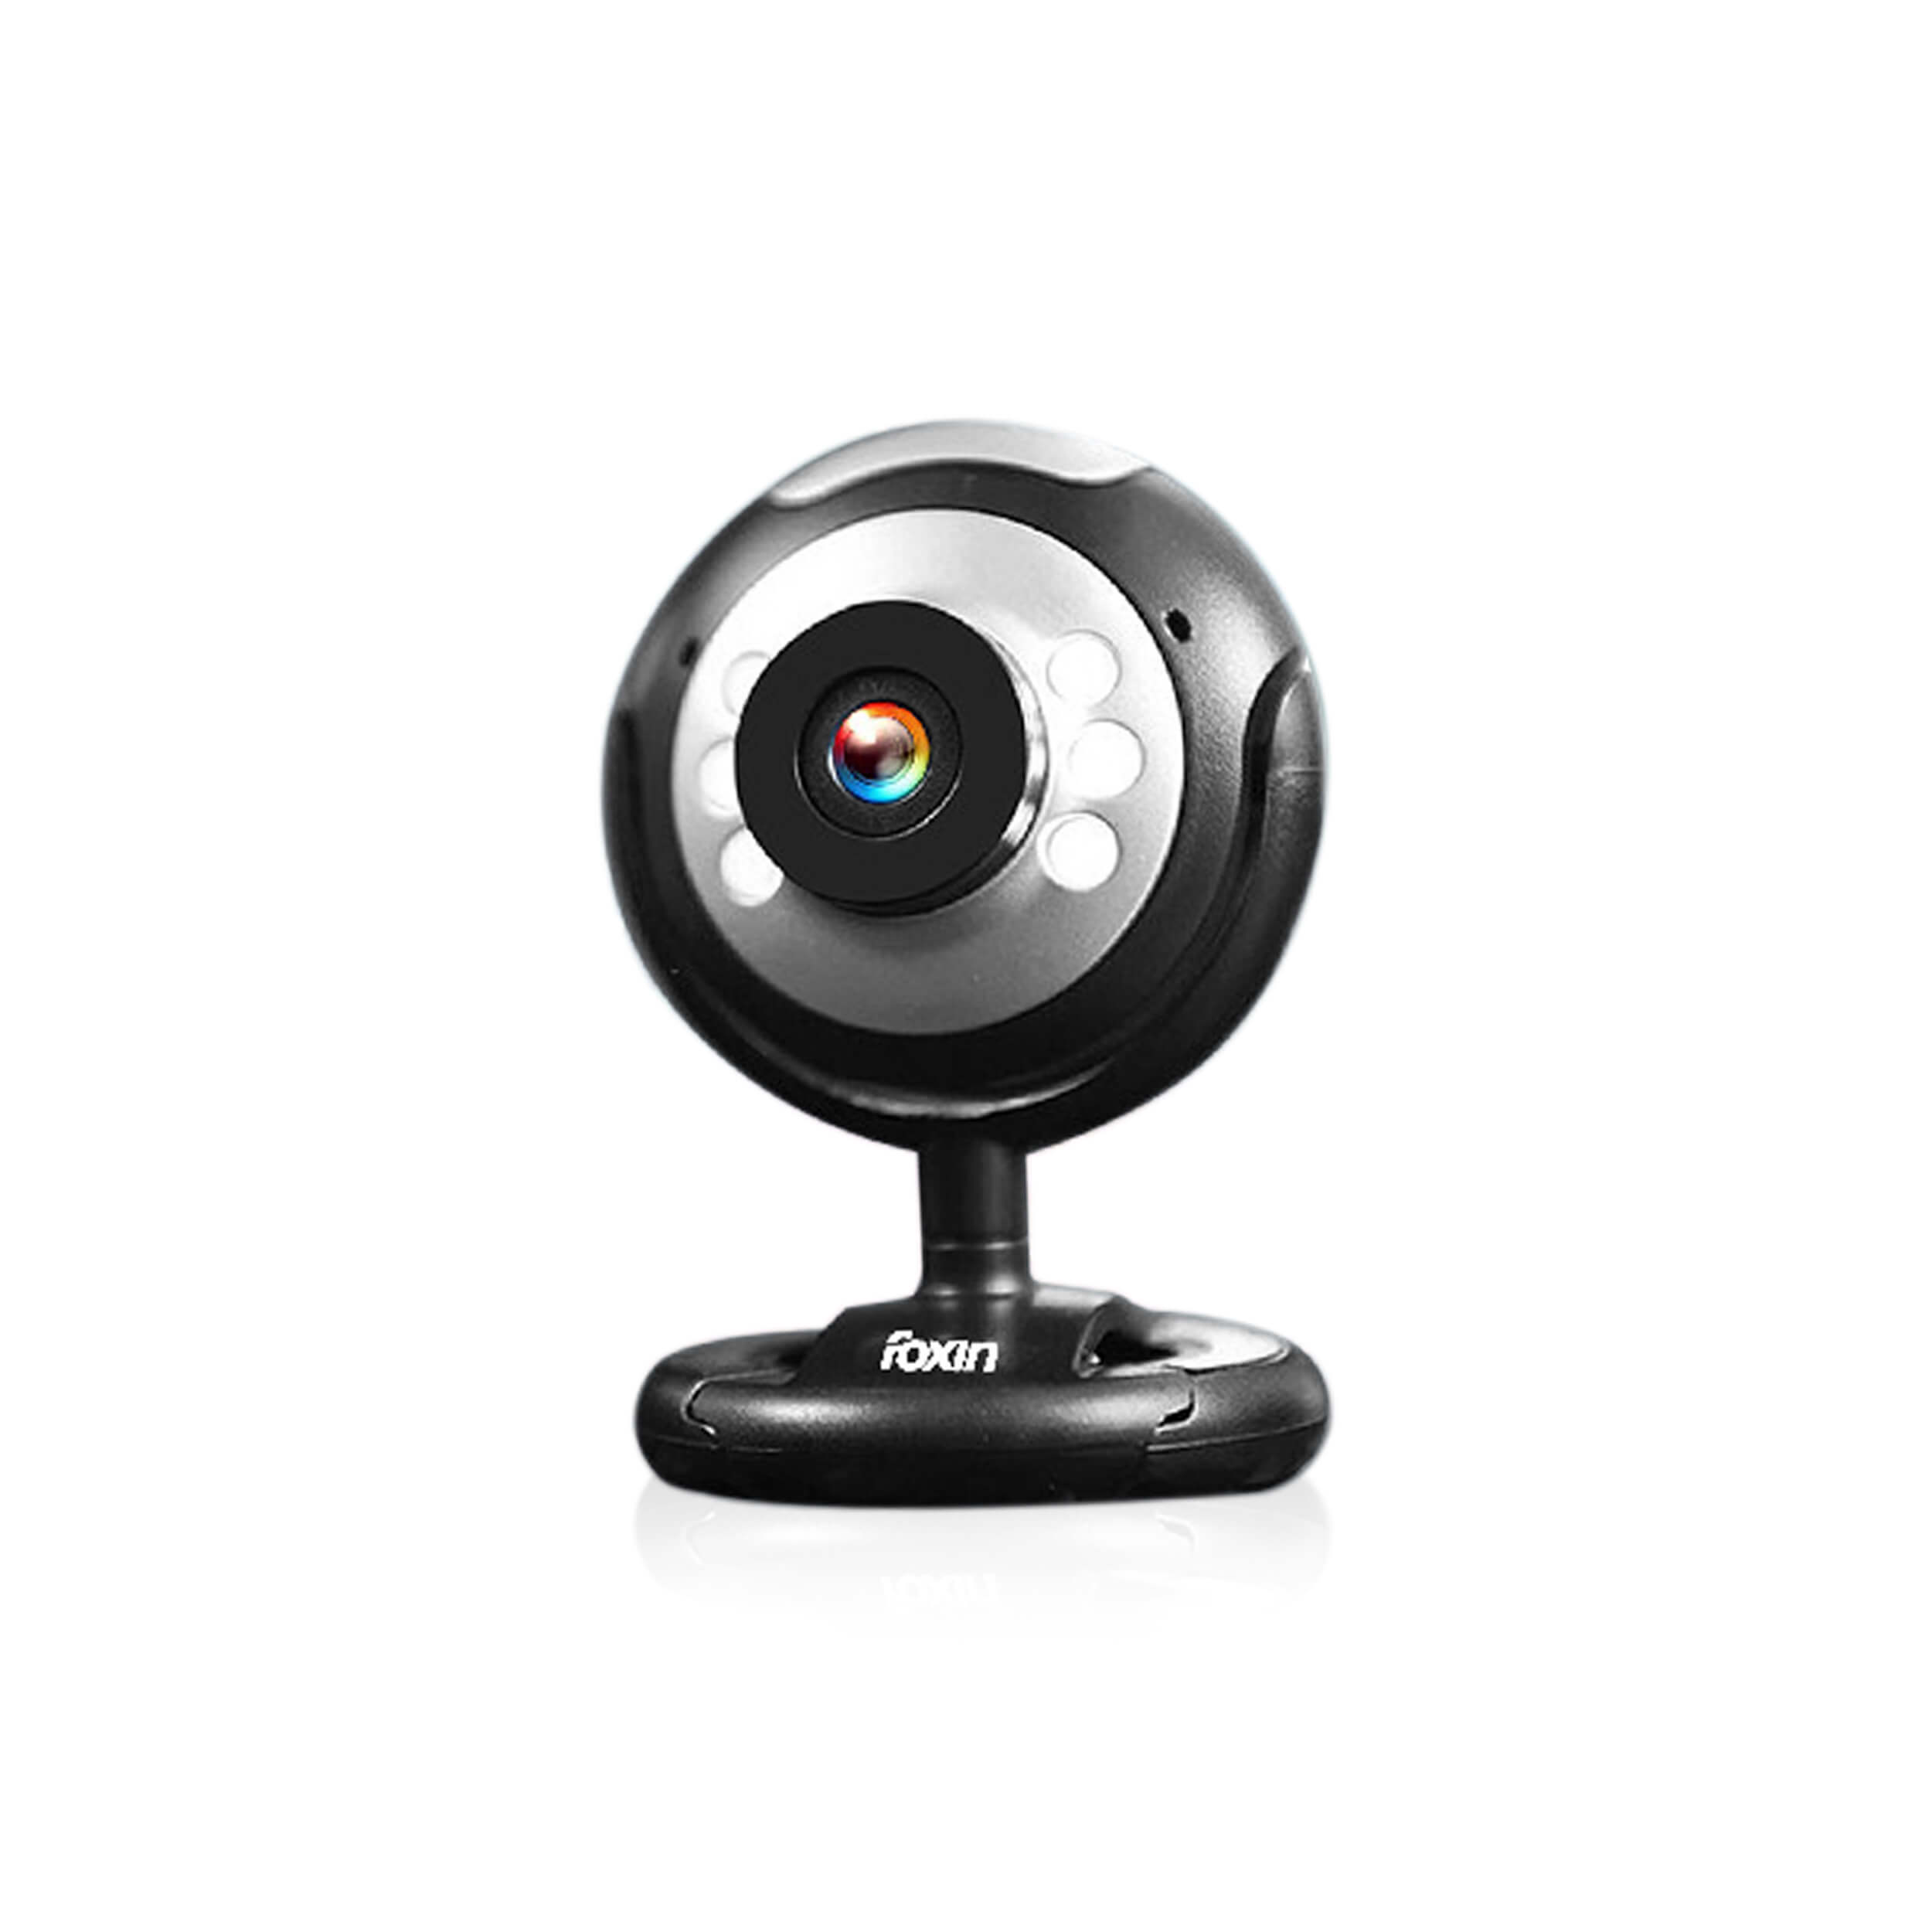 Foxin 30MP Web Camera with in-built mic WEBVISION - OSORO